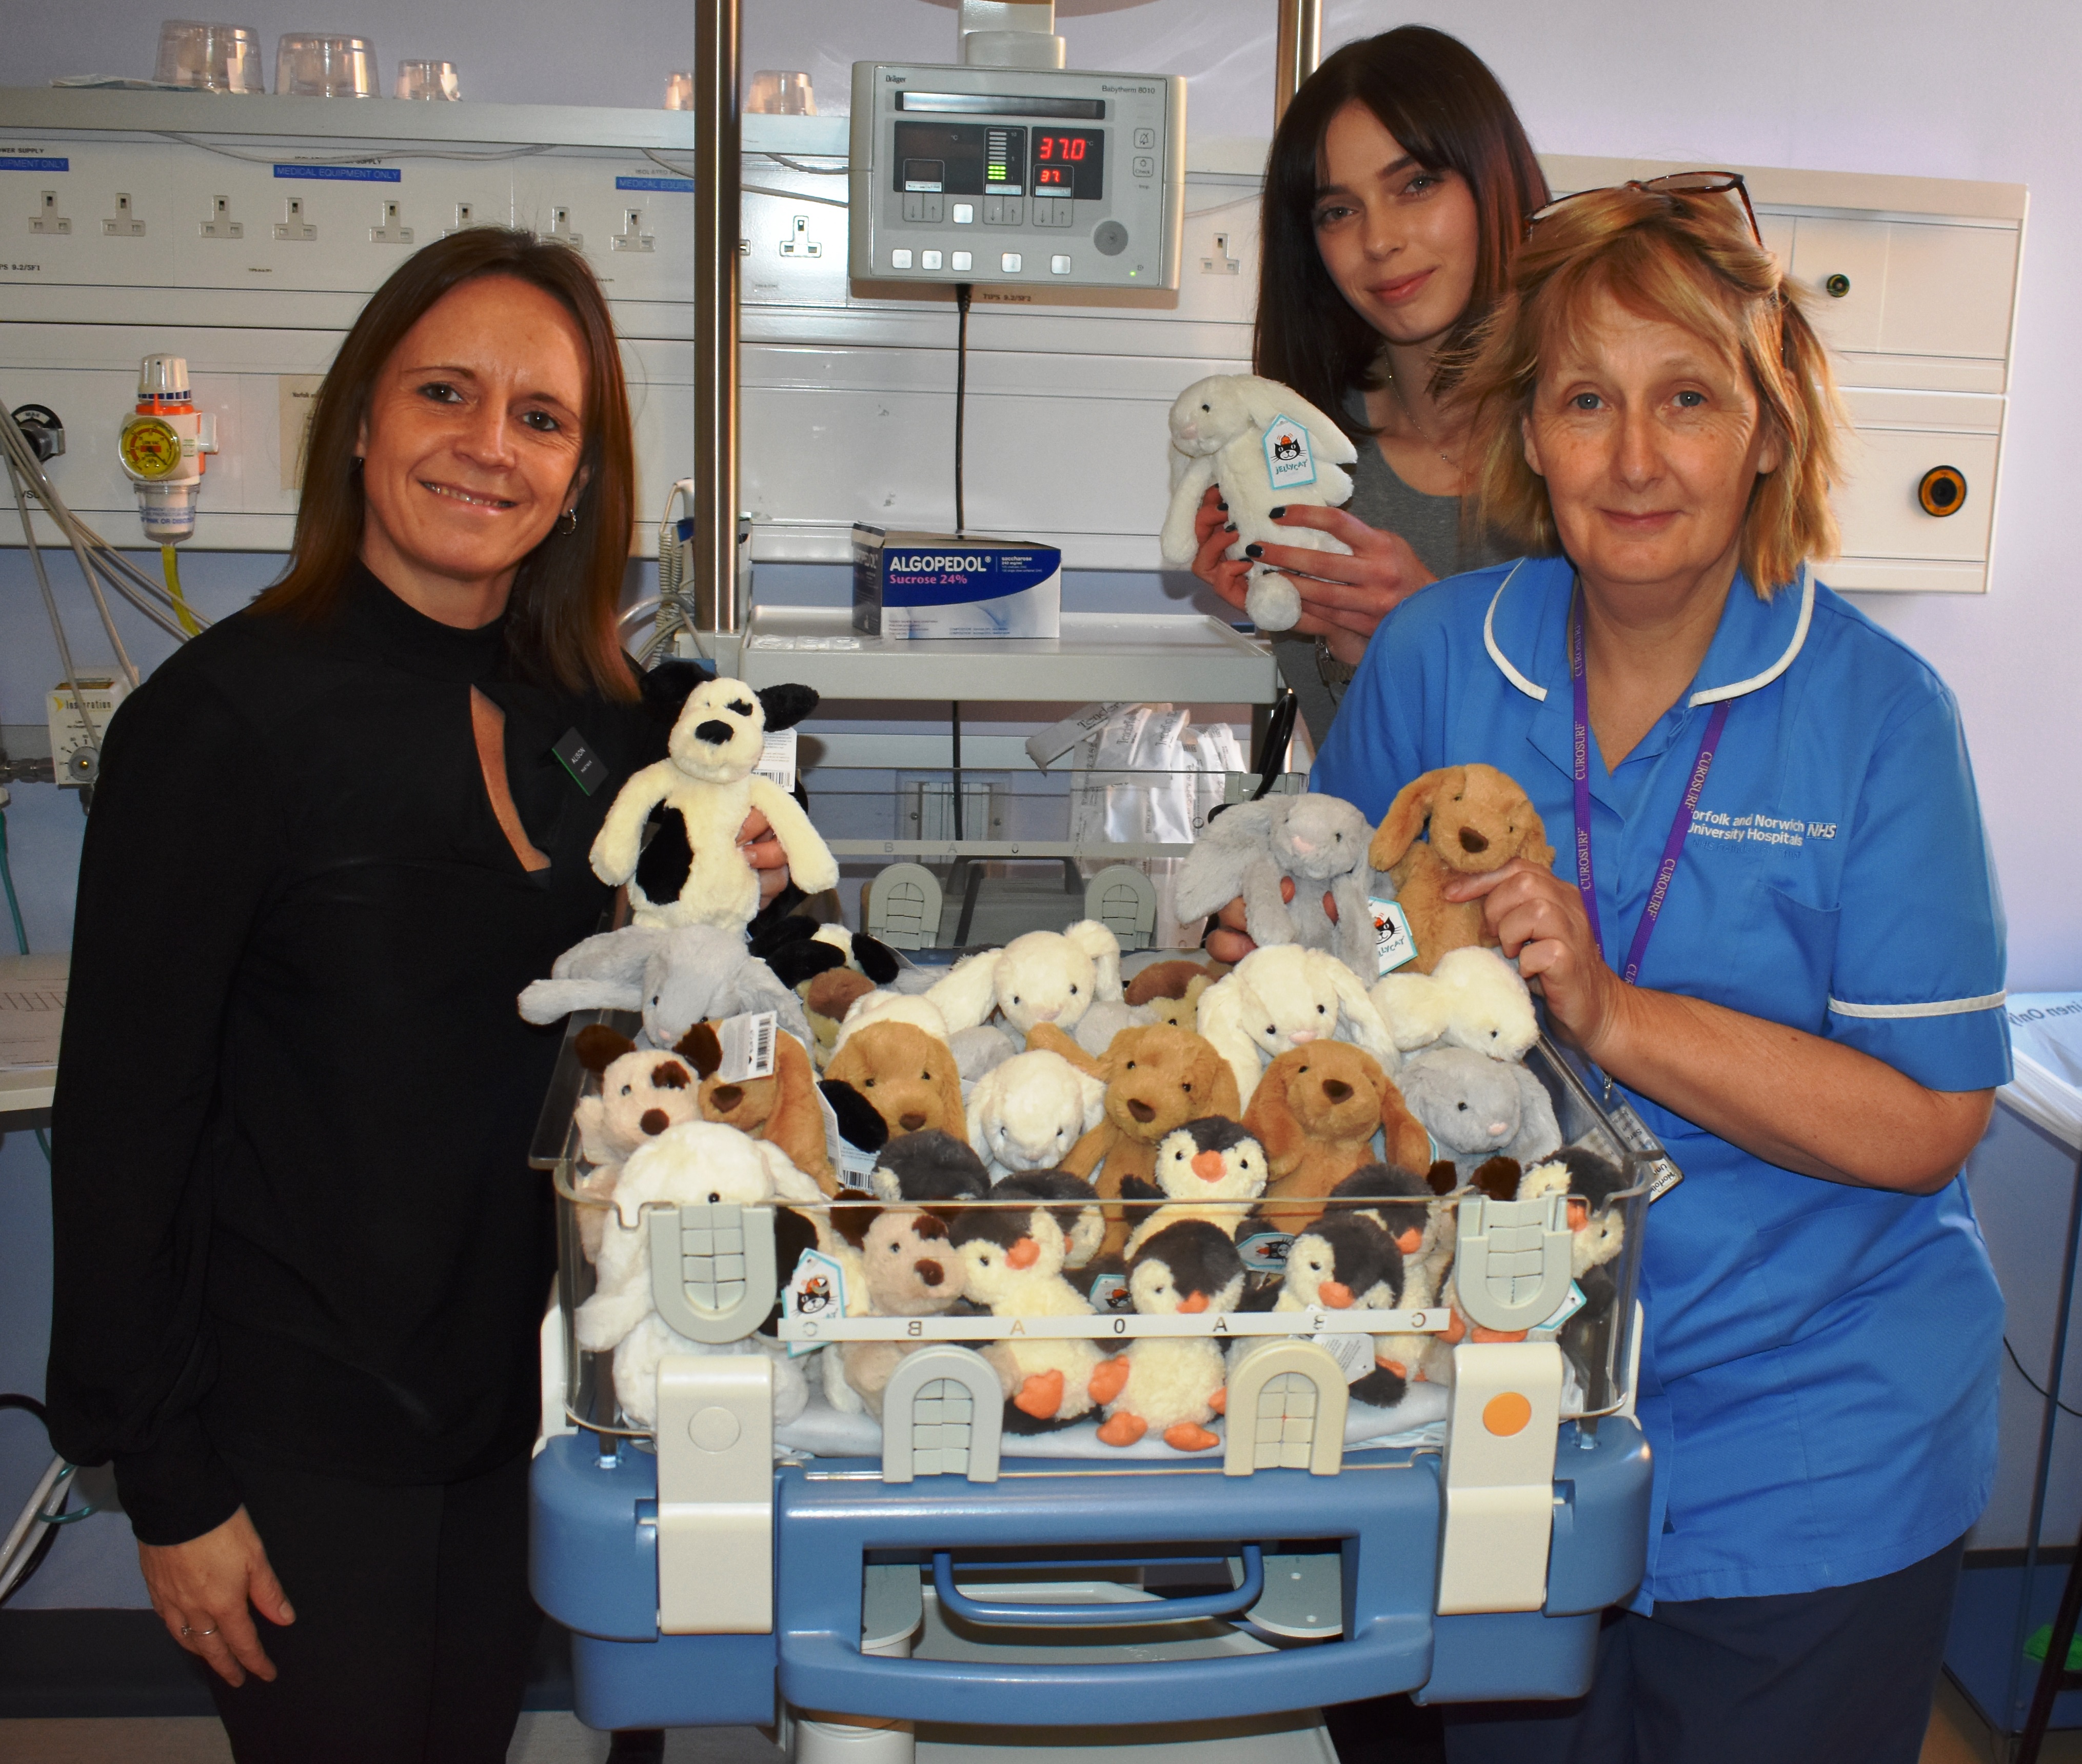 John Lewis staff make special delivery to NICU